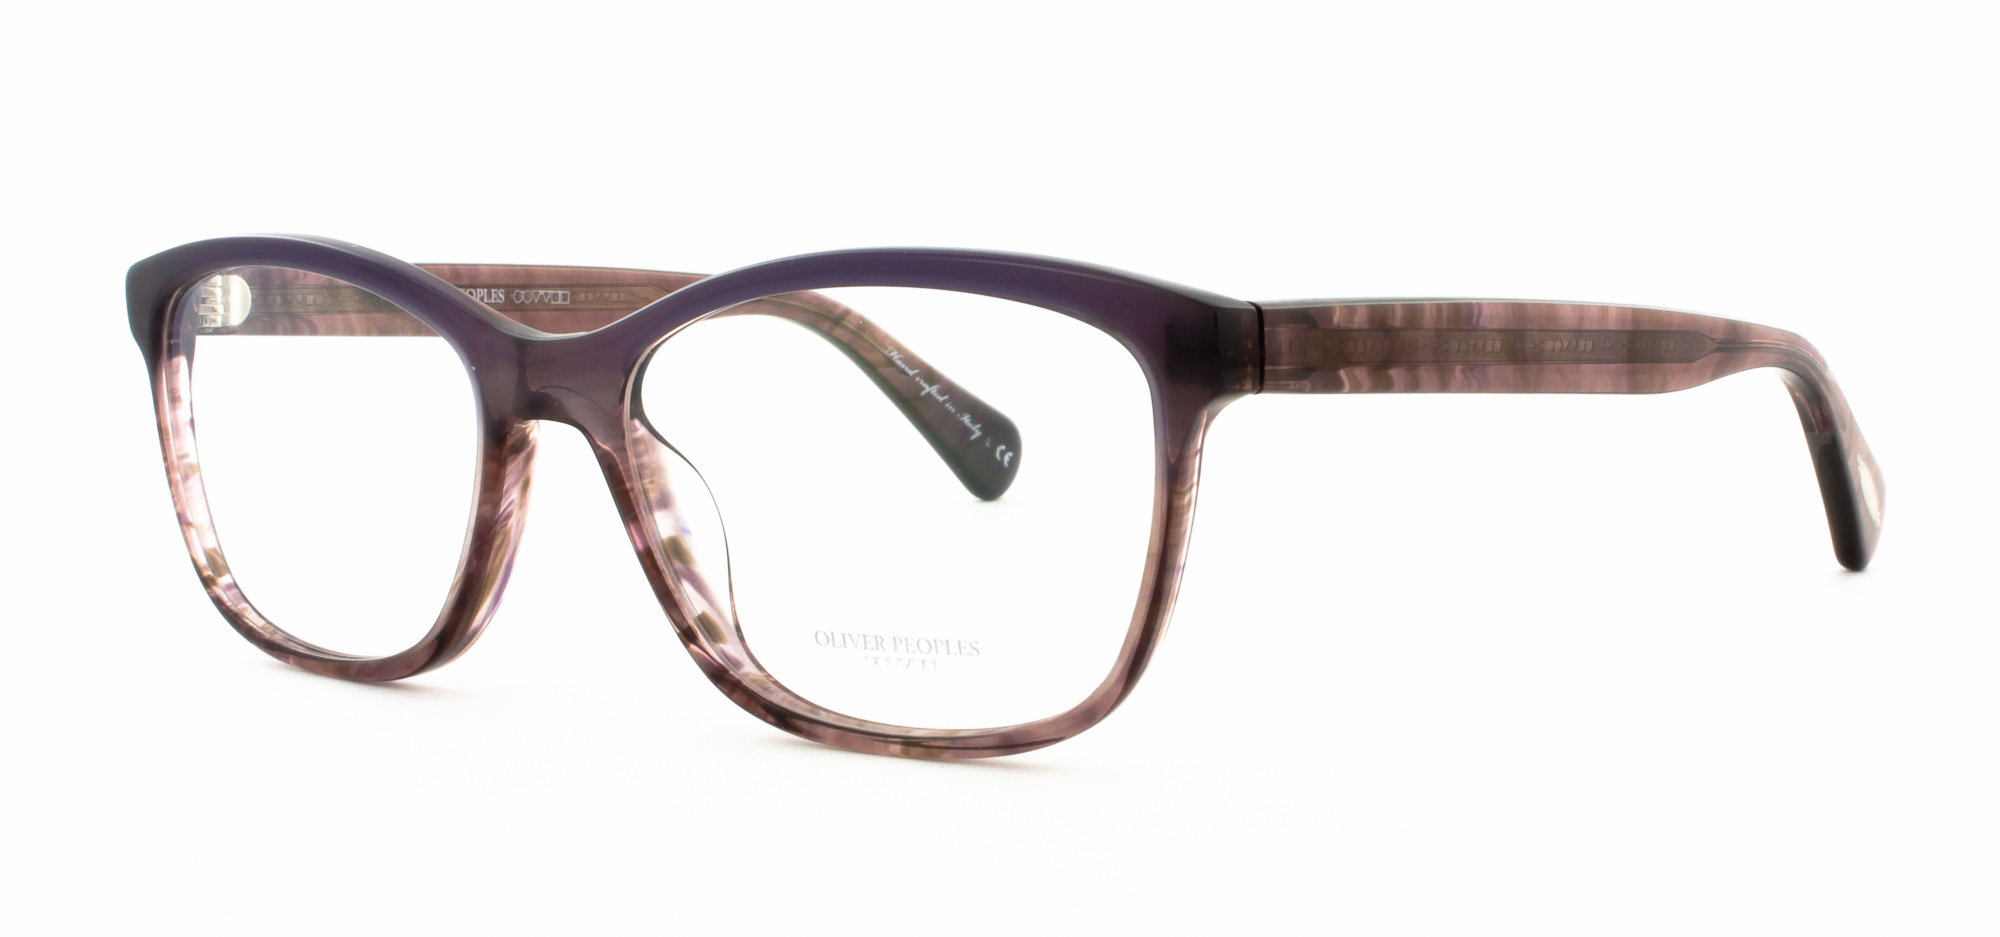 OLIVER PEOPLES FOLLIES 1418